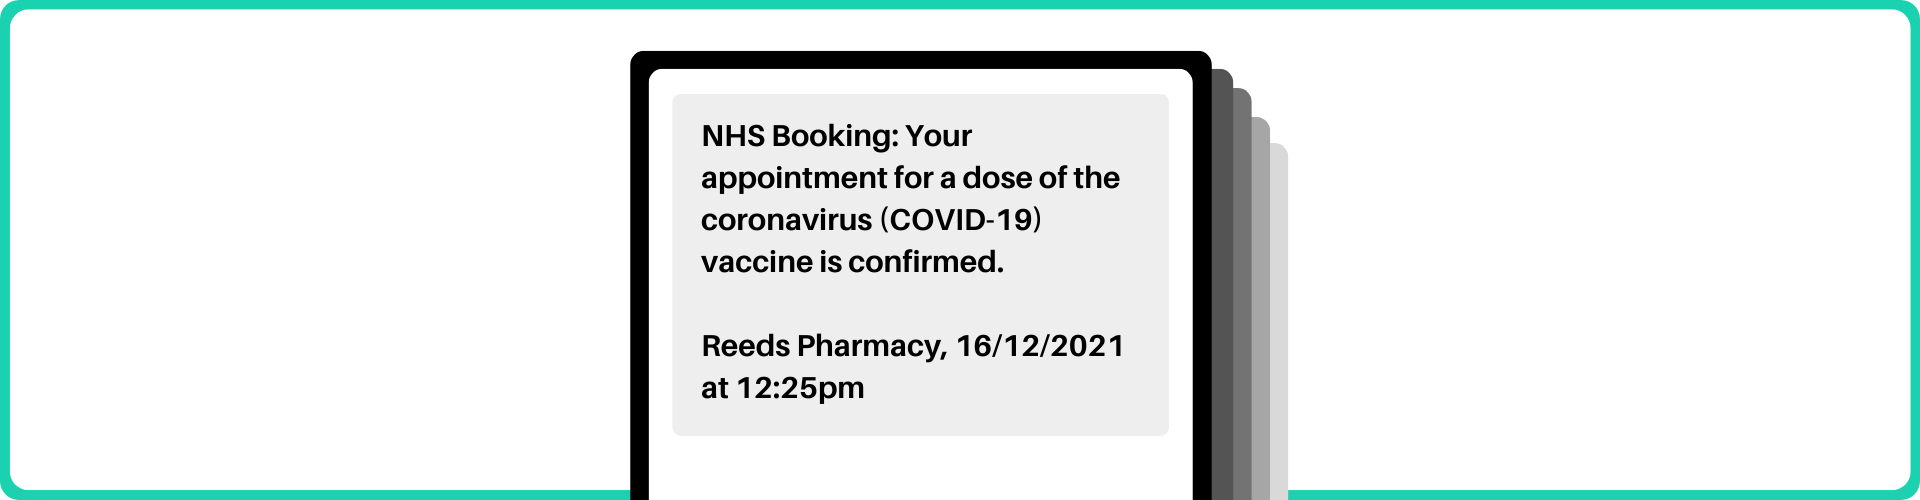 Healthcare appointment confirmation